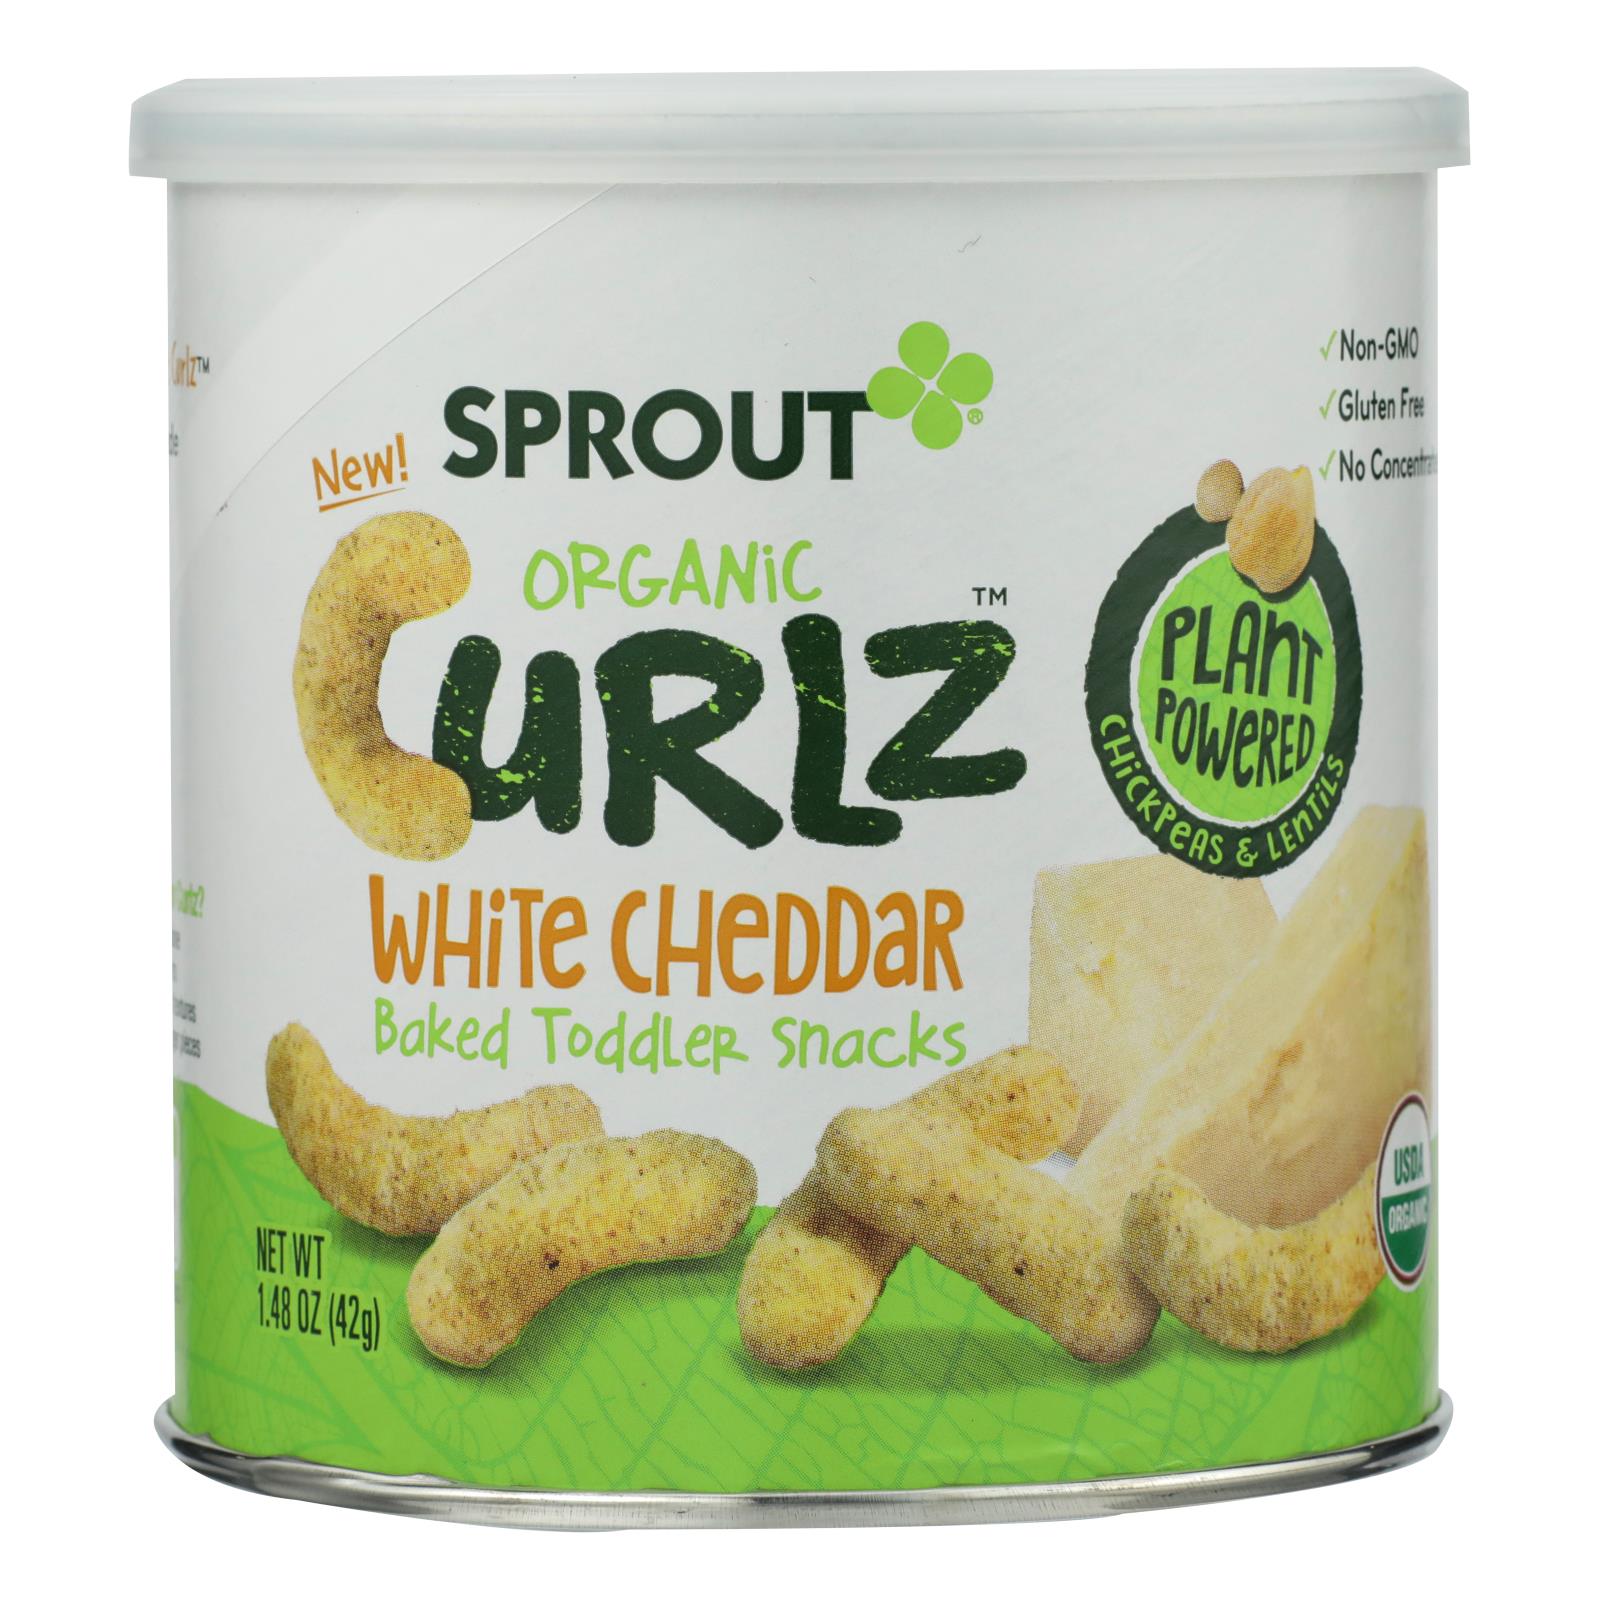 Sprout Organic Curlz White Cheddar Baked Toddler Snacks - 6개 묶음상품 - 1.48 OZ